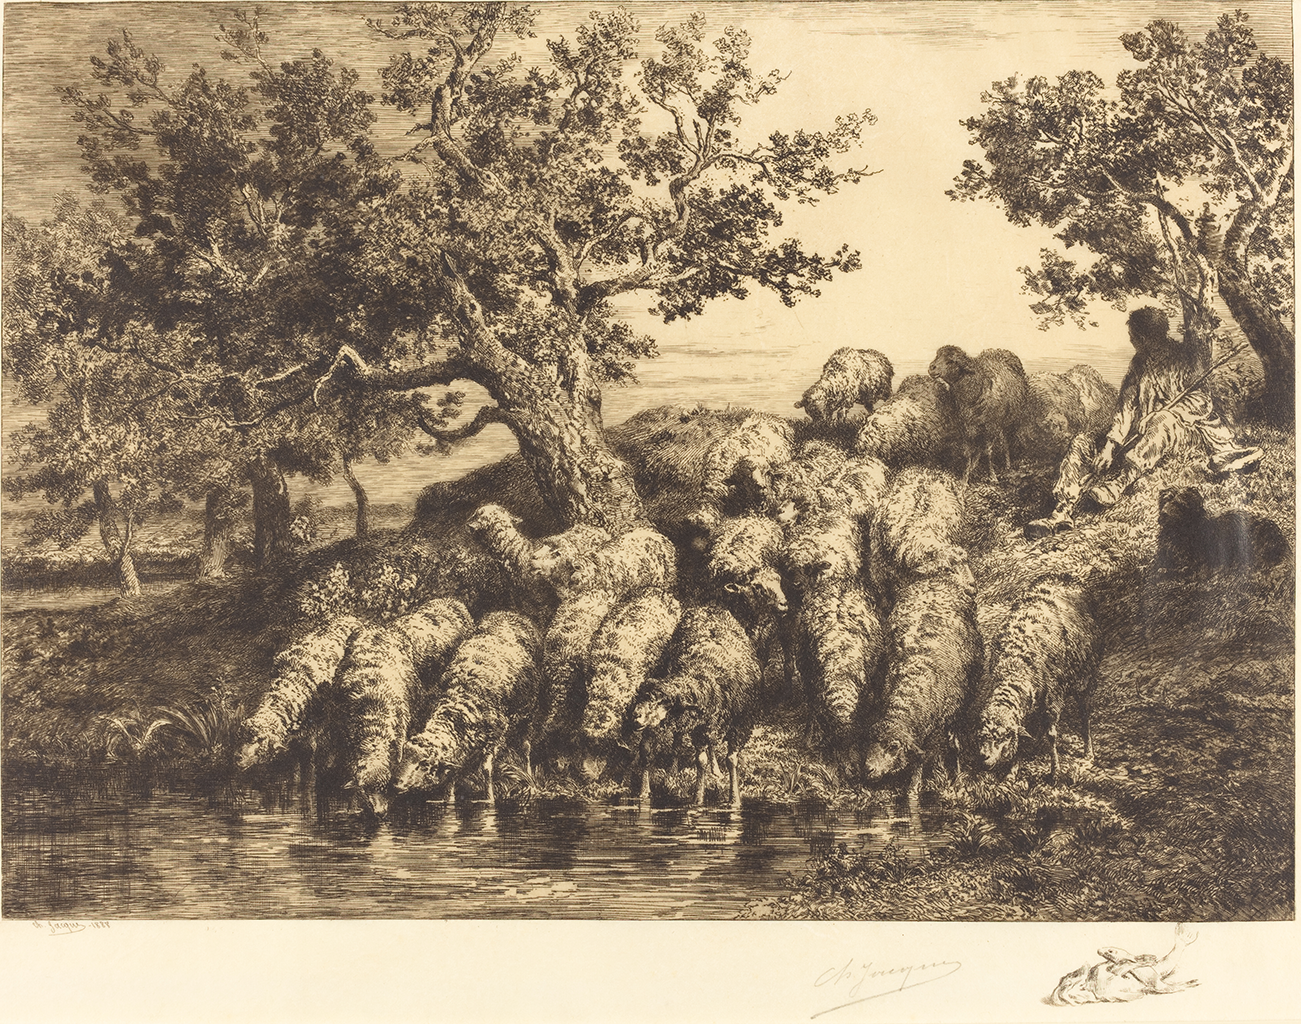 A black and white print of a herd of sheep gathered under a tree and drinking water from a nearby stream. Behind them, a figure sits under the shade of a small tree. Next to him, is a black dog watching the sheep.